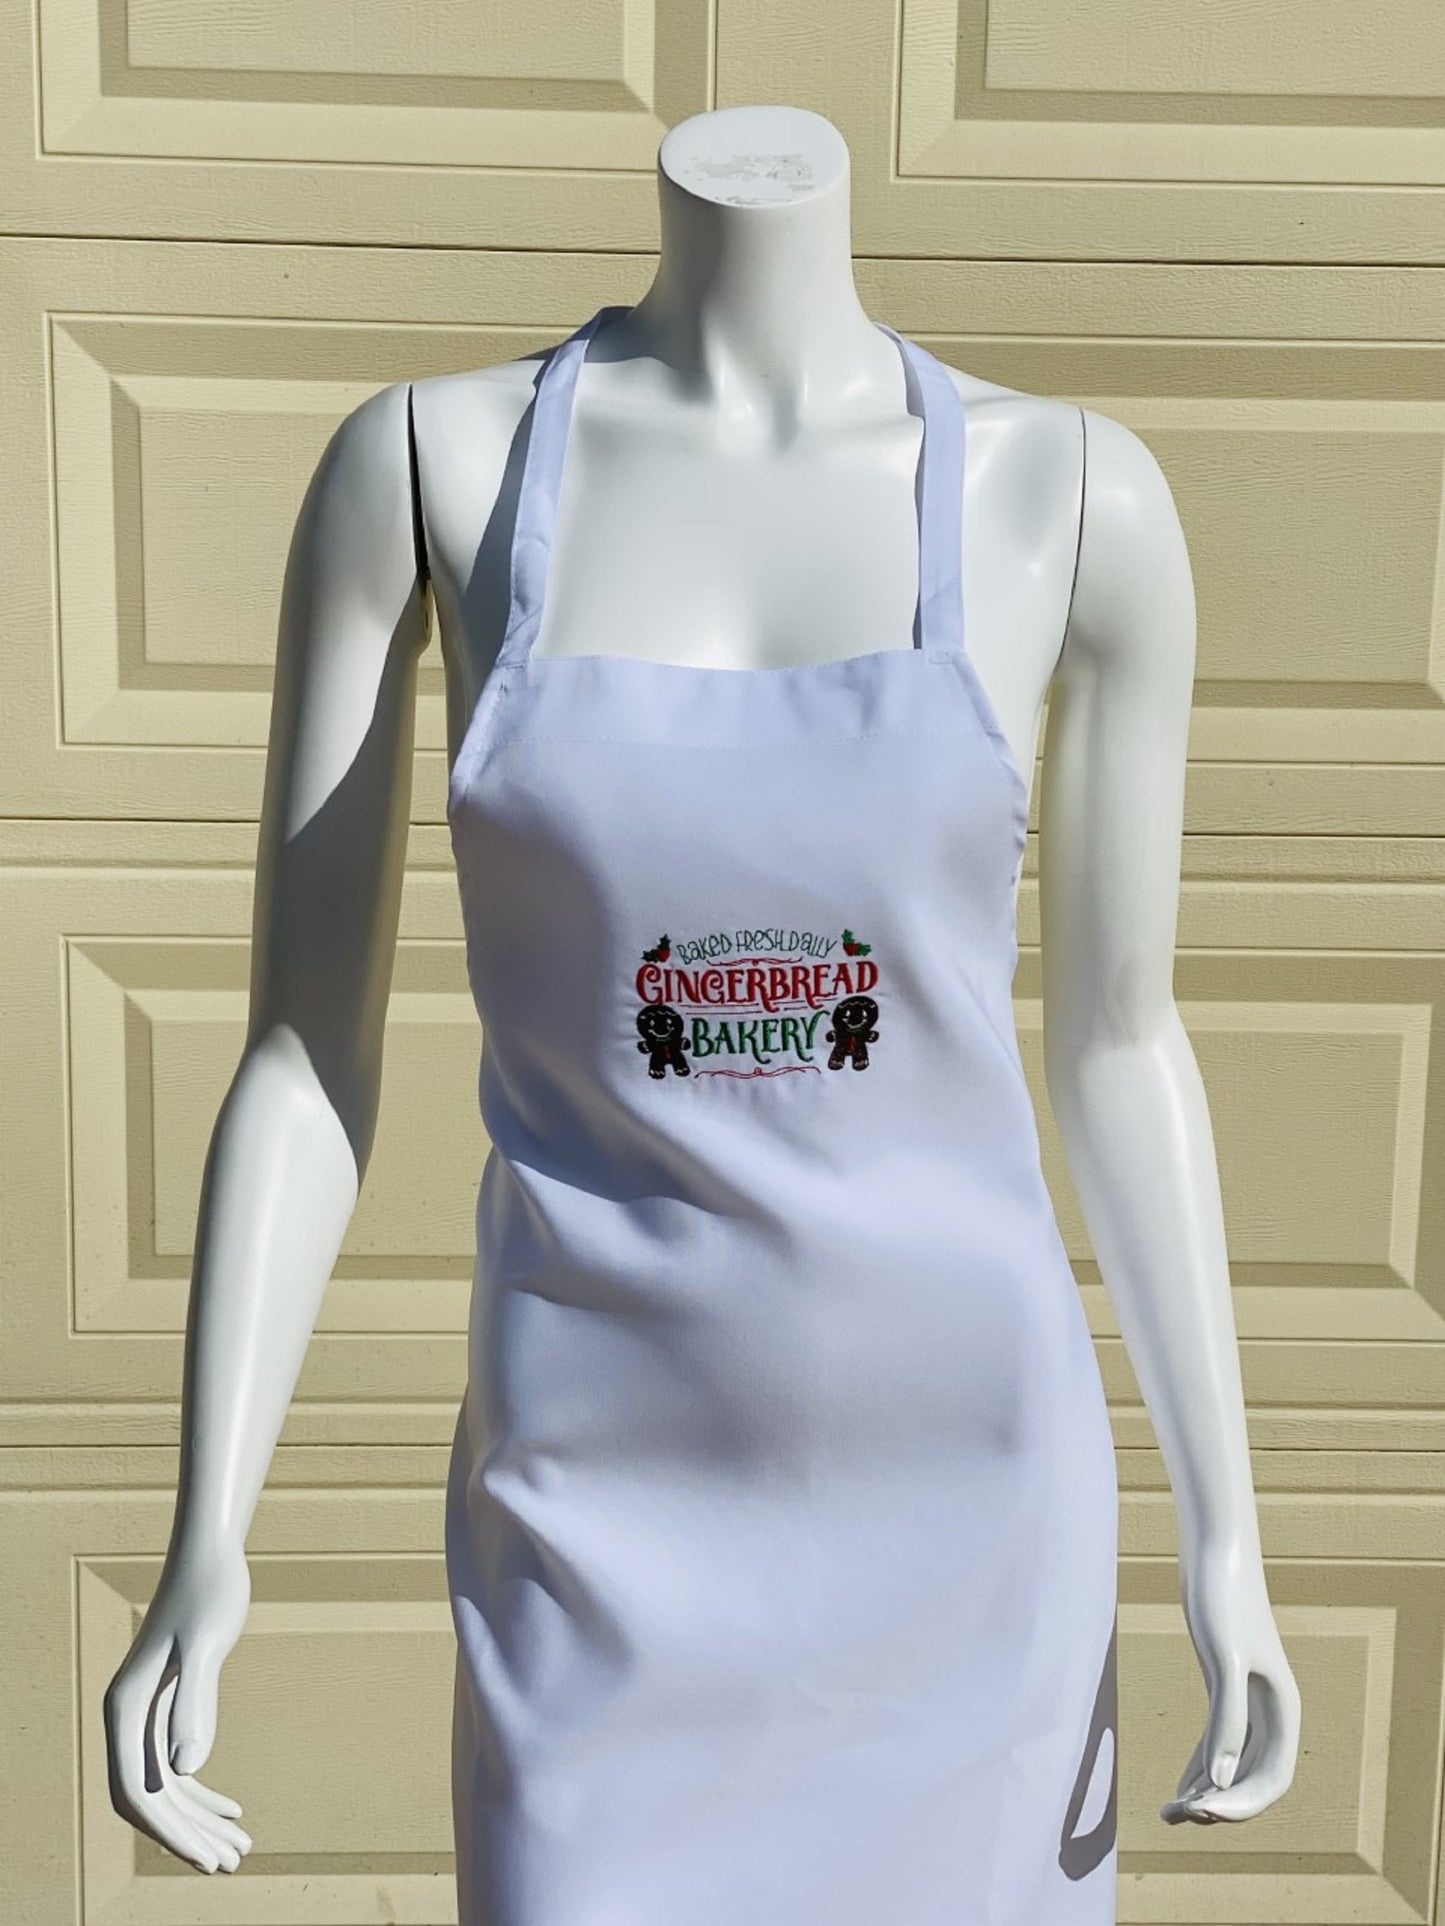 Gingerbread Bakery-Baked Fresh Daily-Machine Embroidered White Adult Apron